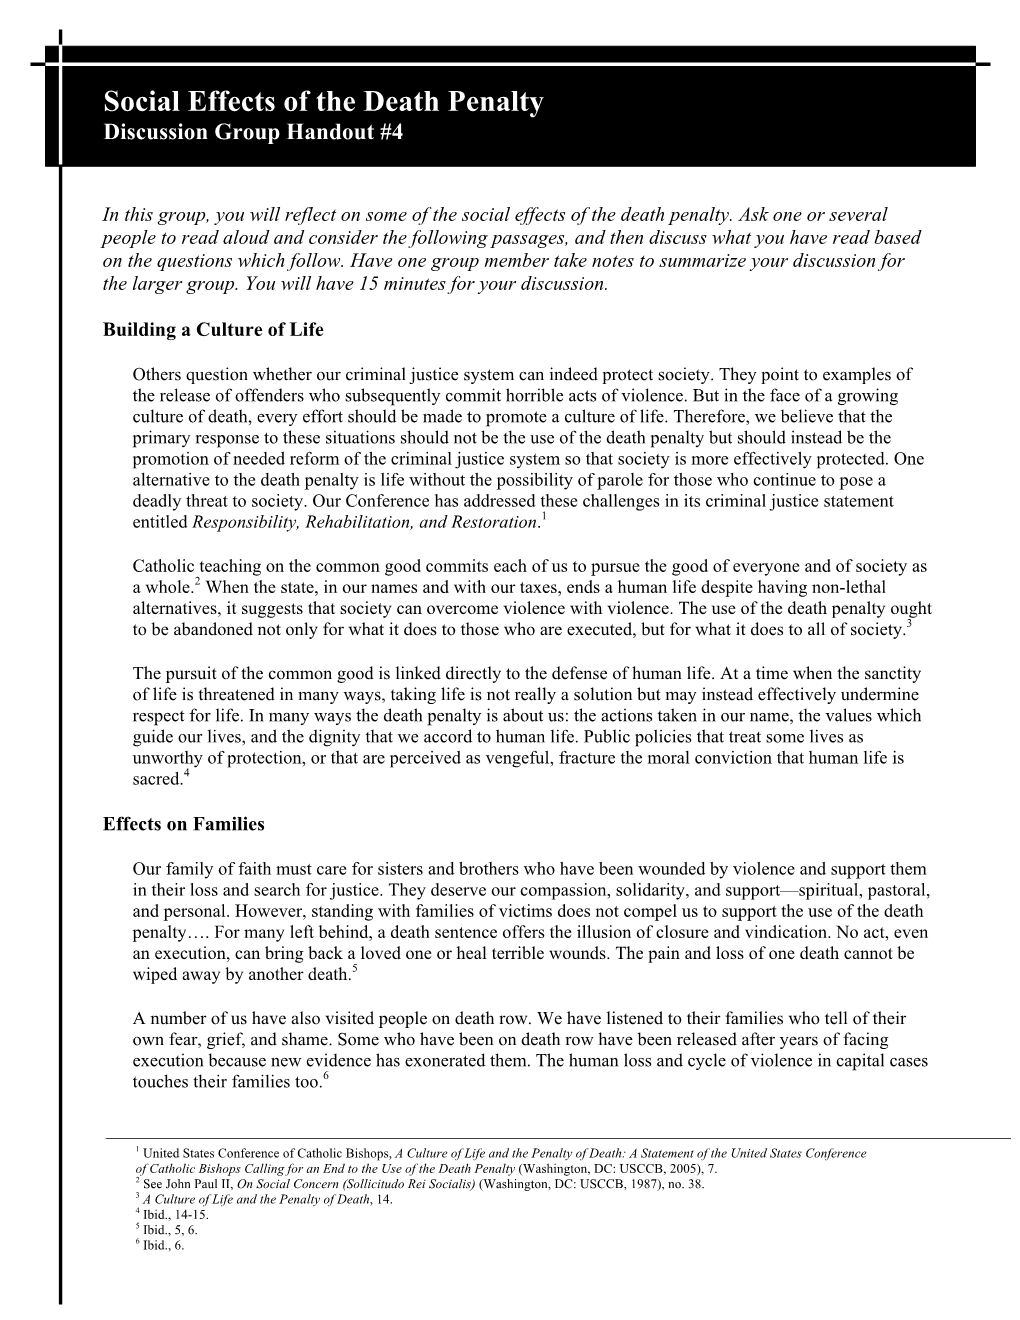 Social Effects of the Death Penalty Discussion Group Handout #4